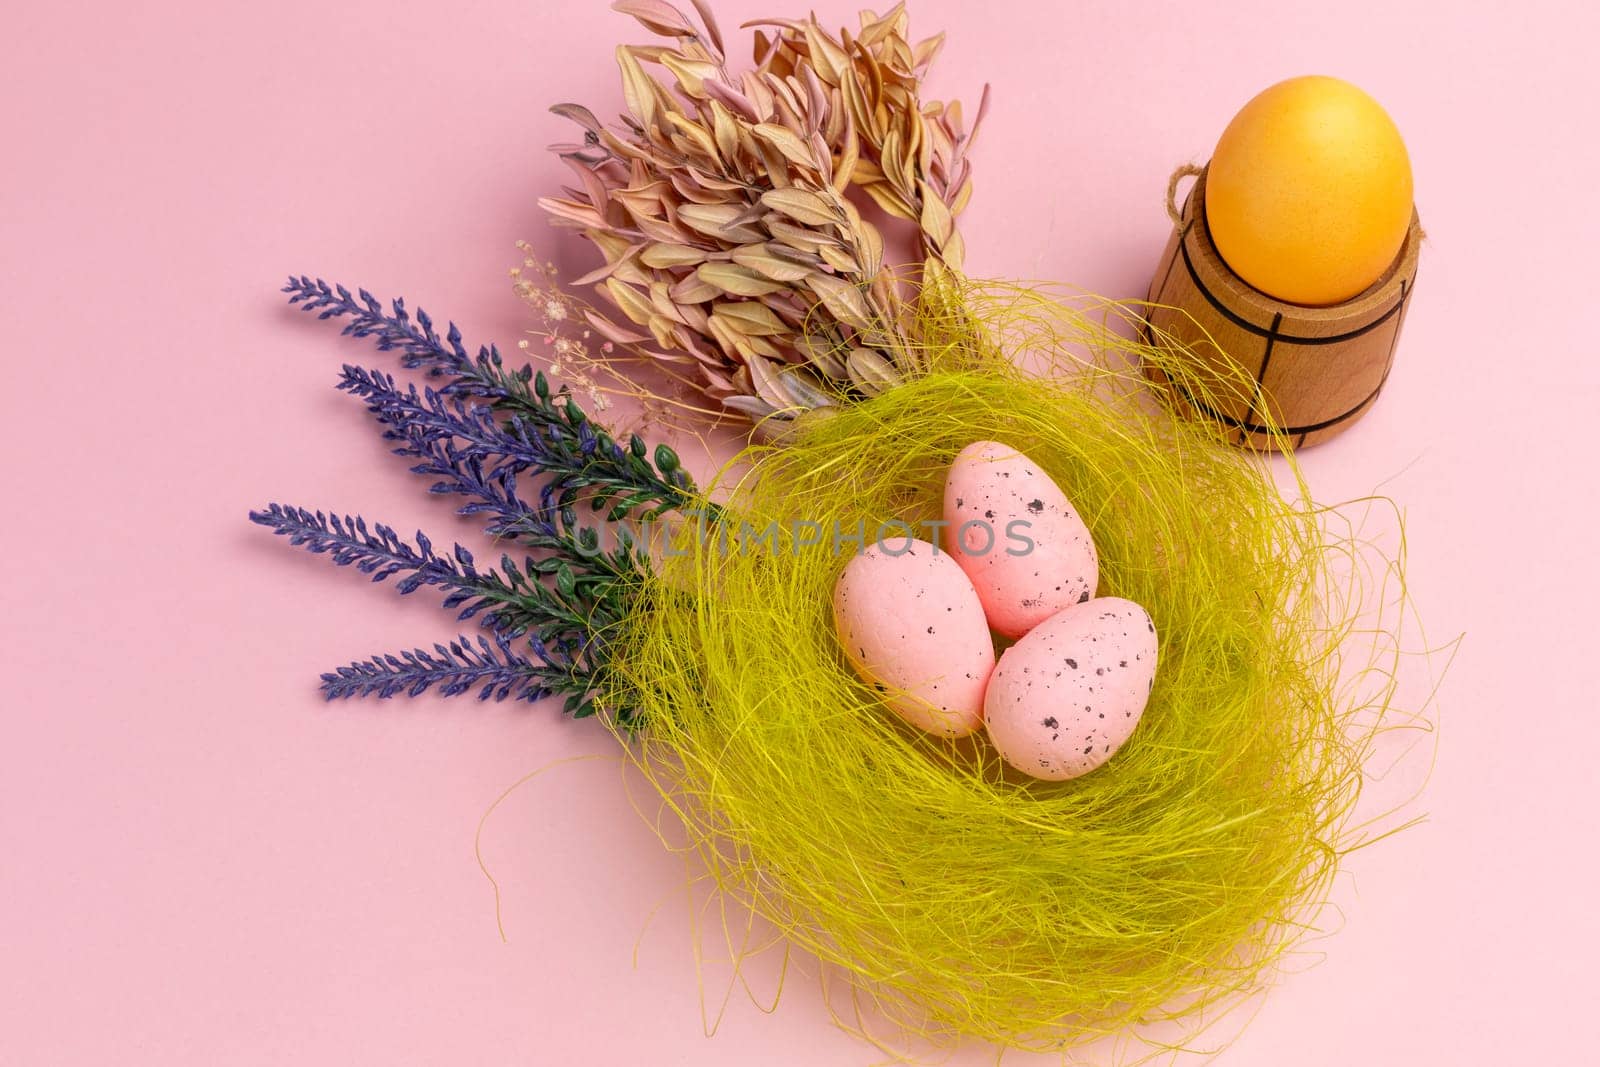 Nest with colored Easter eggs on the pink background with decor plants and wooden utensil. Top view.